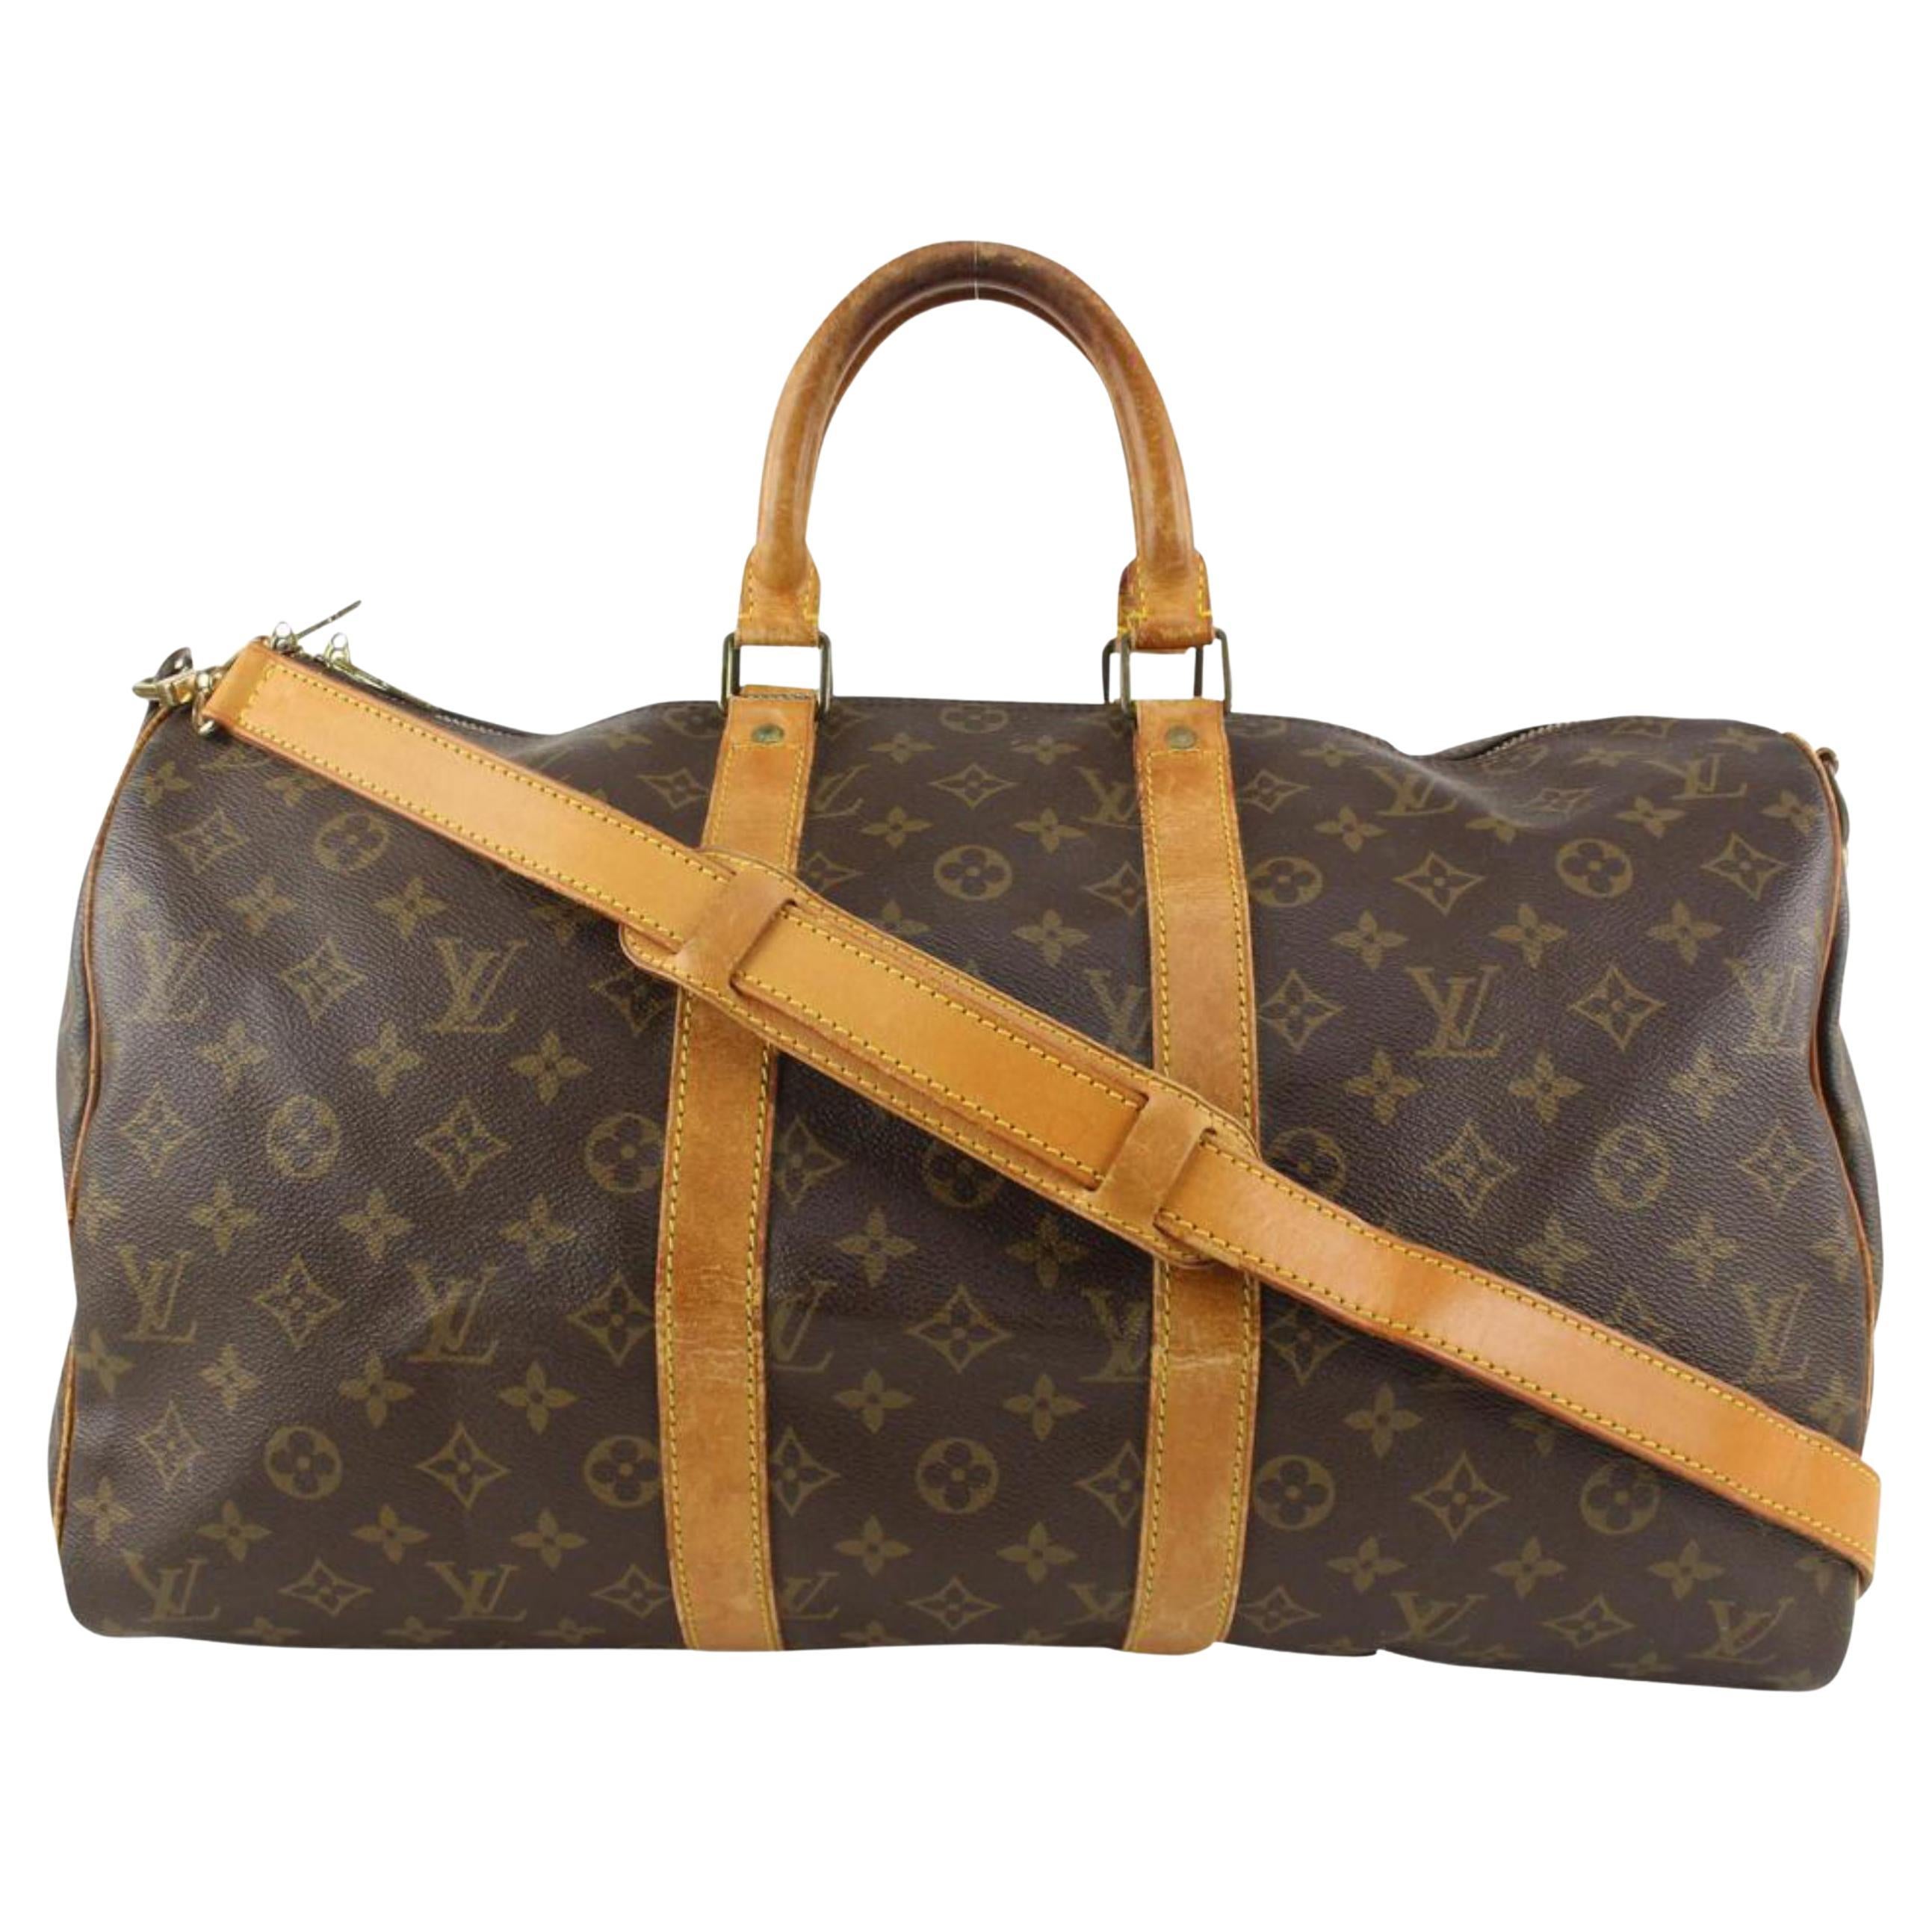 Louis Vuitton Monogram Keepall Bandouliere 45 Duffle Bag with Strap 1122lv11 For Sale